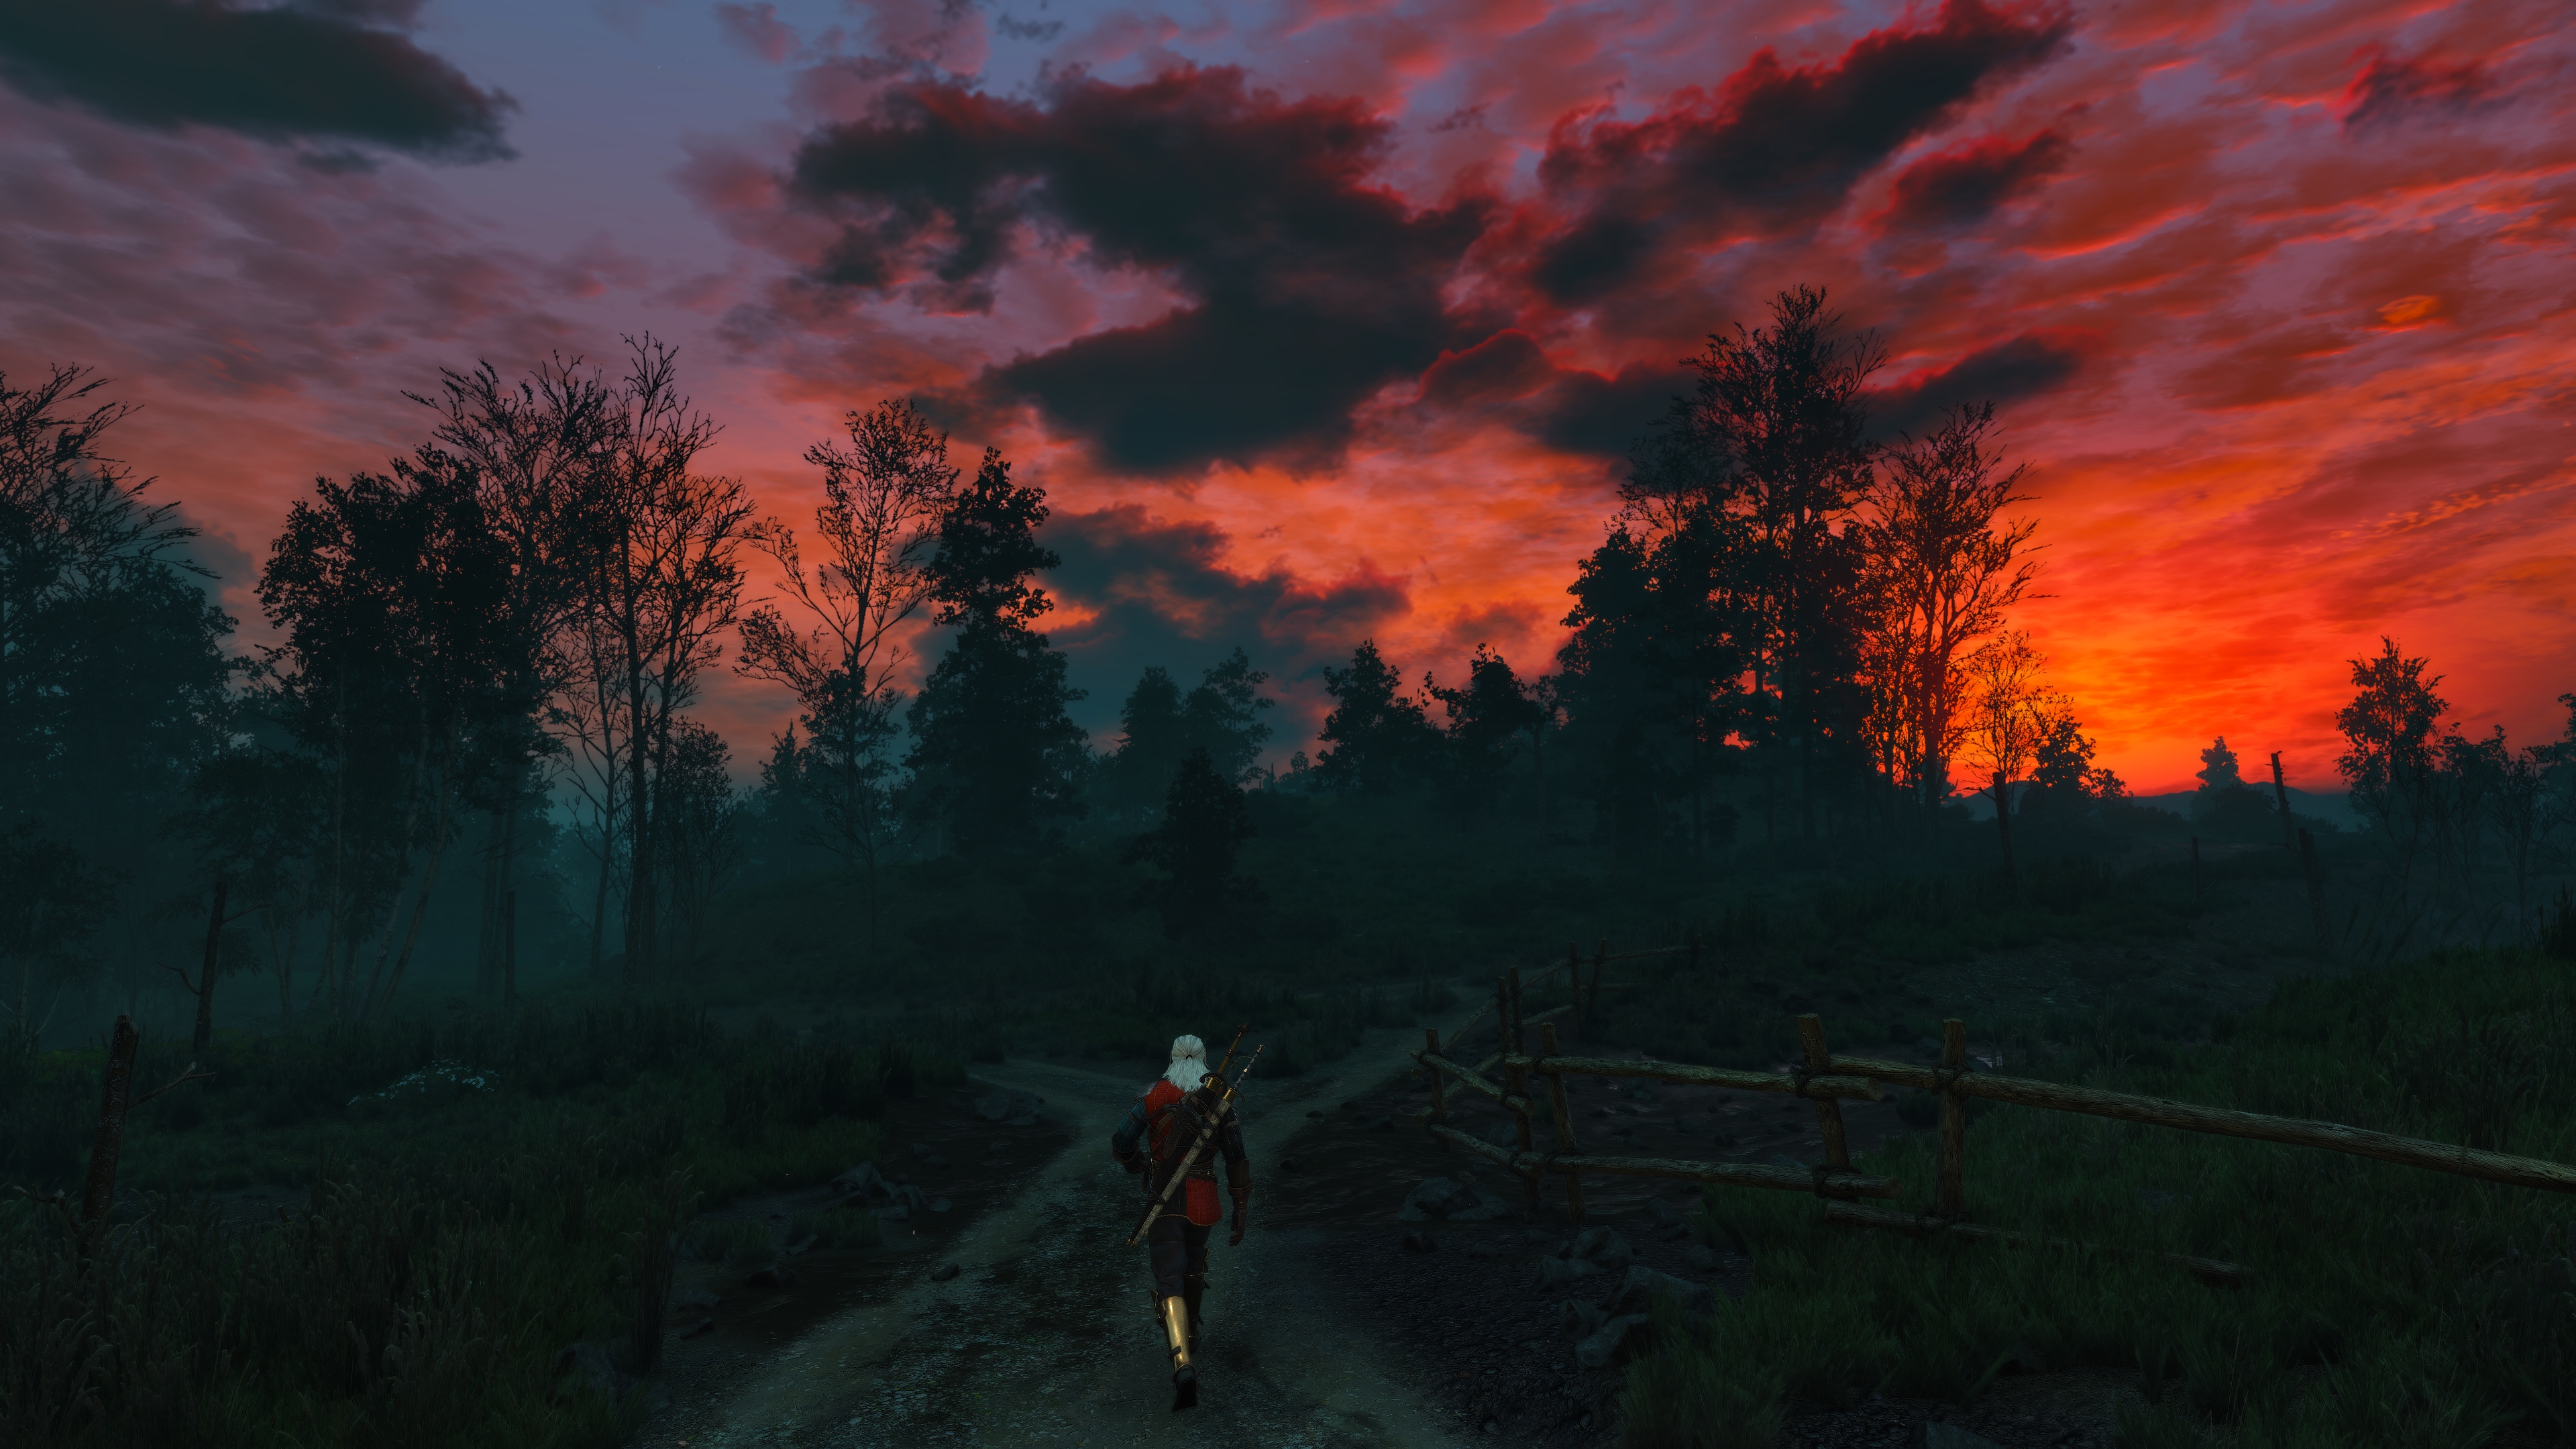 General 3840x2160 The Witcher 3: Wild Hunt screen shot PC gaming Geralt of Rivia sunset forest video games video game art walking video game characters CGI sunset glow sunlight trees sky clouds sword men with swords path men outdoors outdoors